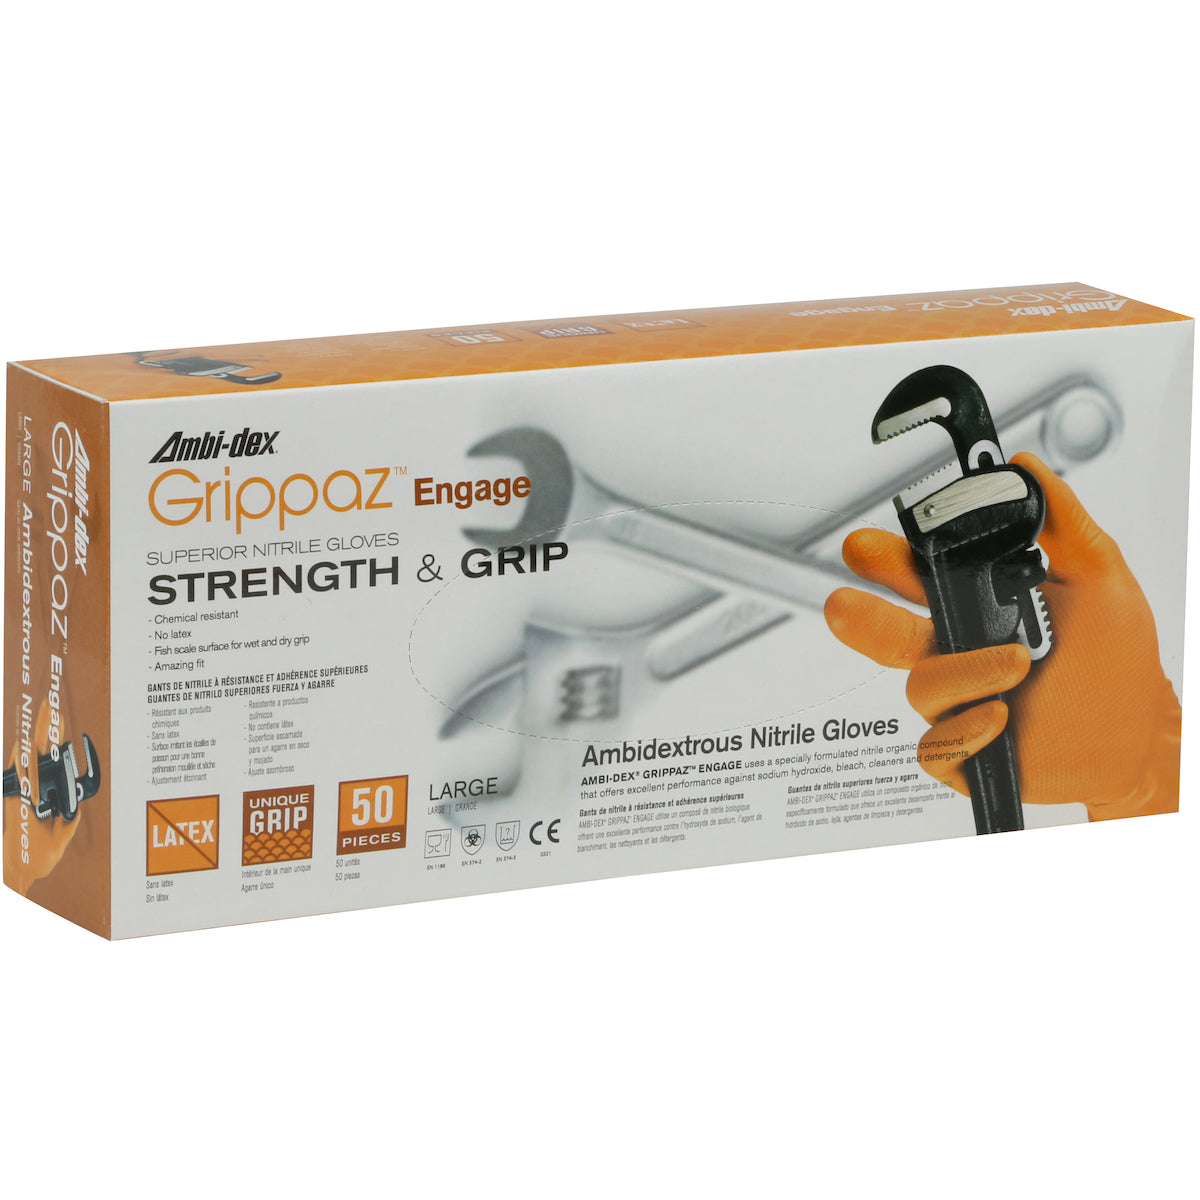 Grippaz 67-307/XL Extended Use Ambidextrous Nitrile Glove with Textured Fish Scale Grip - 7 Mil